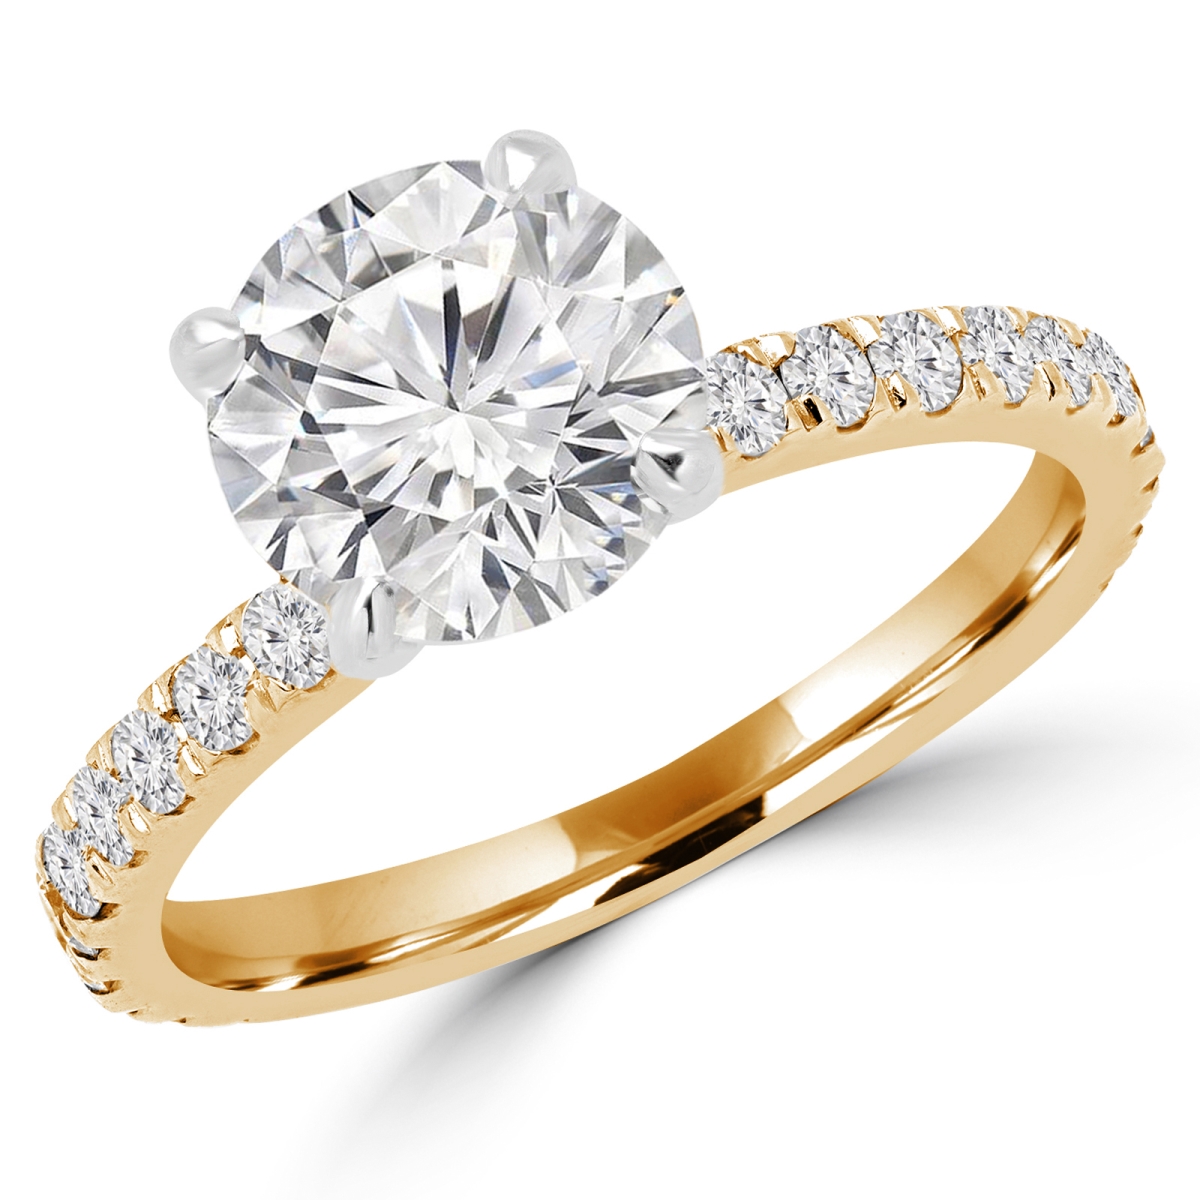 Picture of Majesty Diamonds MD160340-3.75 1 CTW Round Cut Diamond Multi Stone Engagement Ring in 14K Yellow Gold - Size 3.75